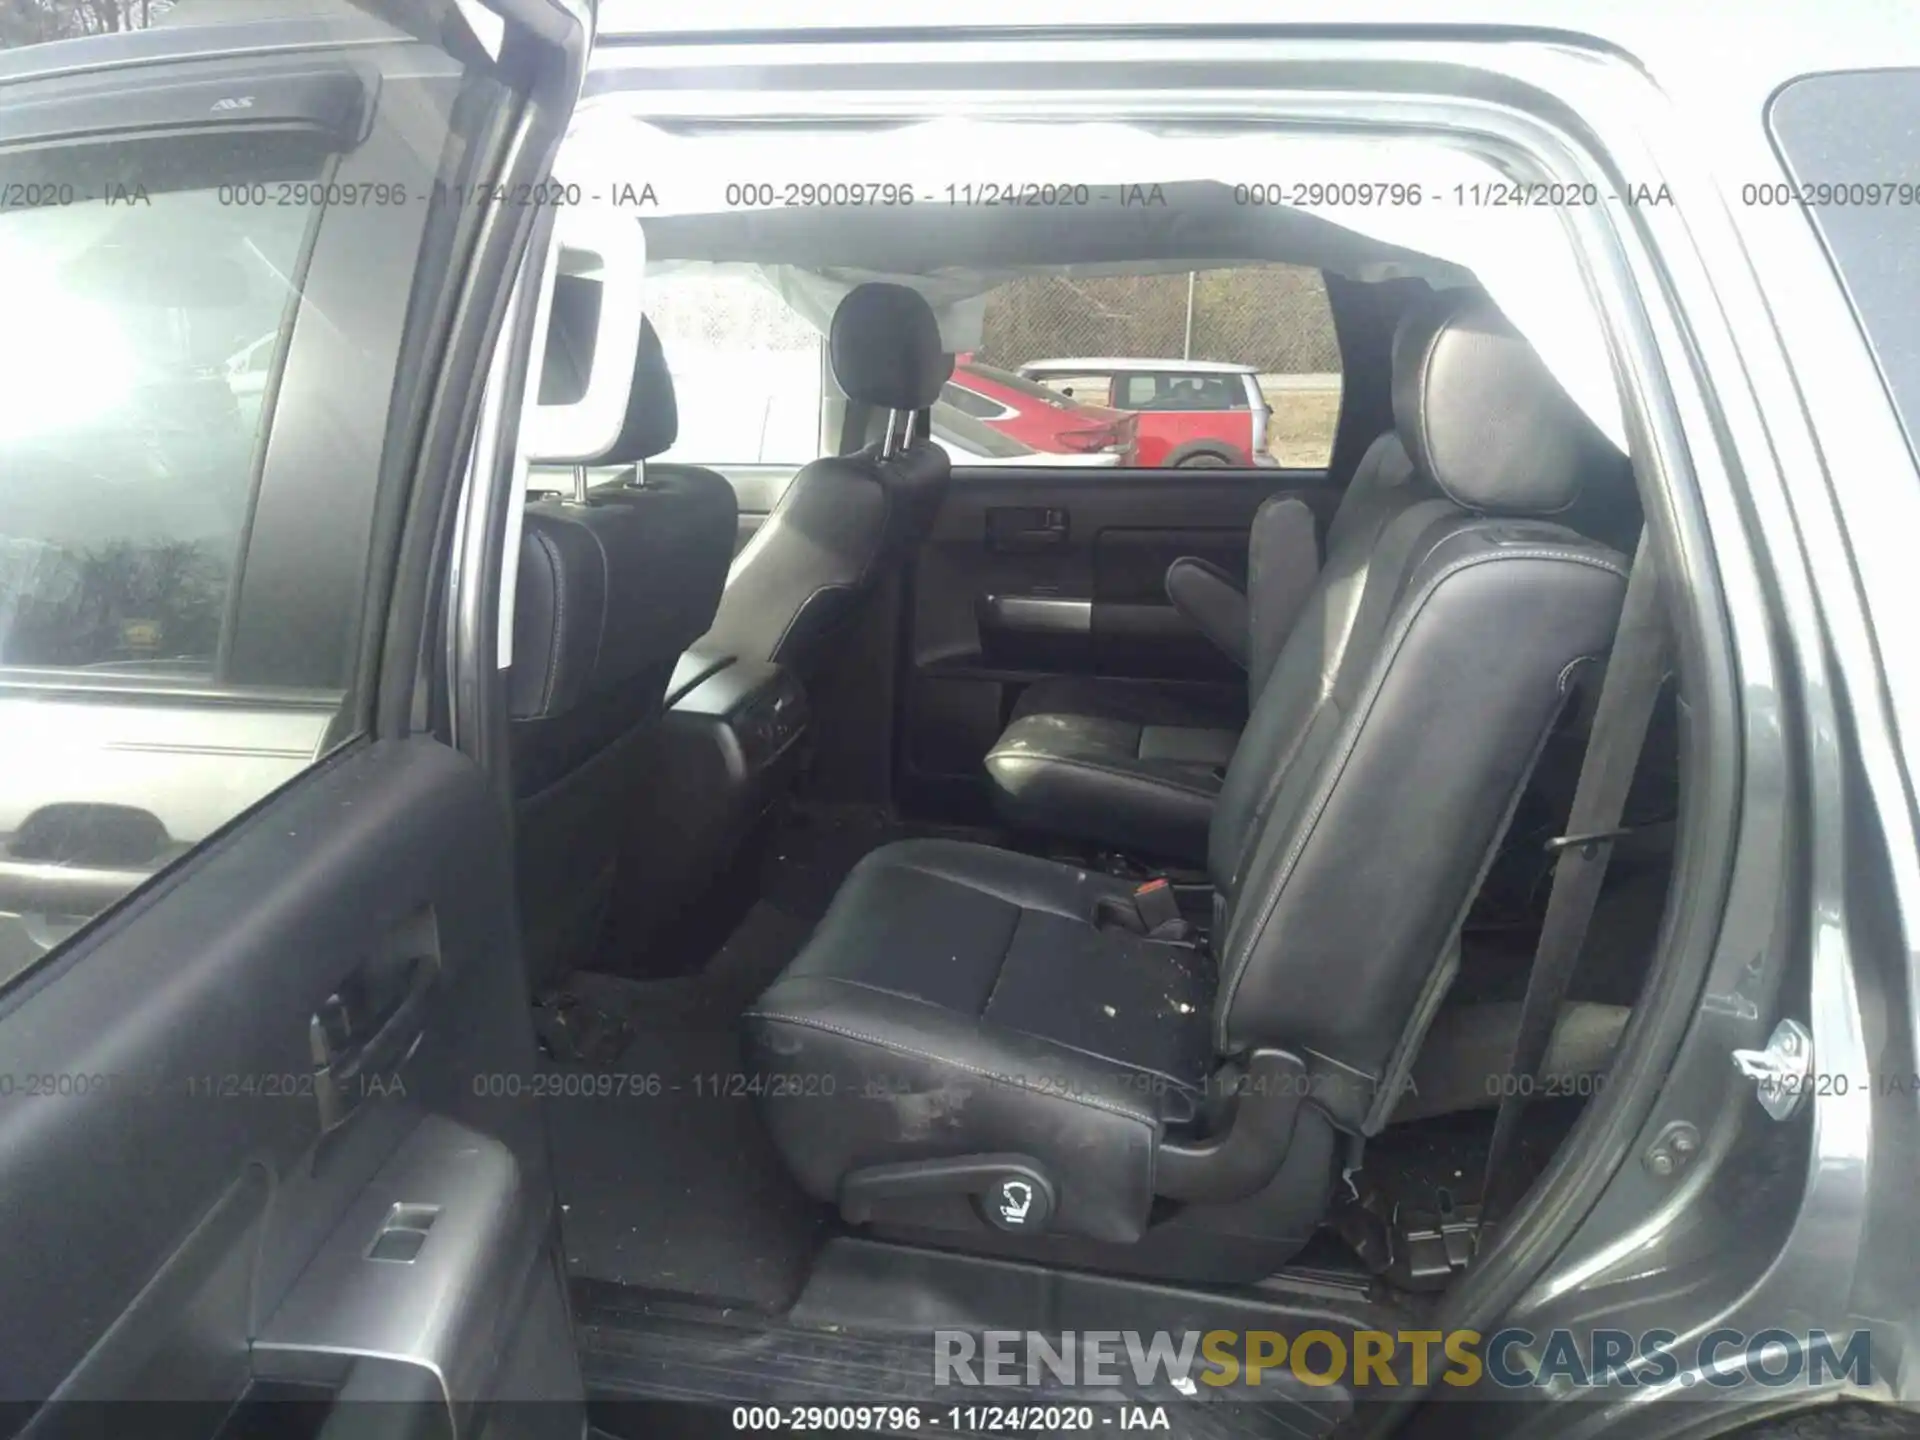 8 Photograph of a damaged car 5TDBY5G11KS167349 TOYOTA SEQUOIA 2019